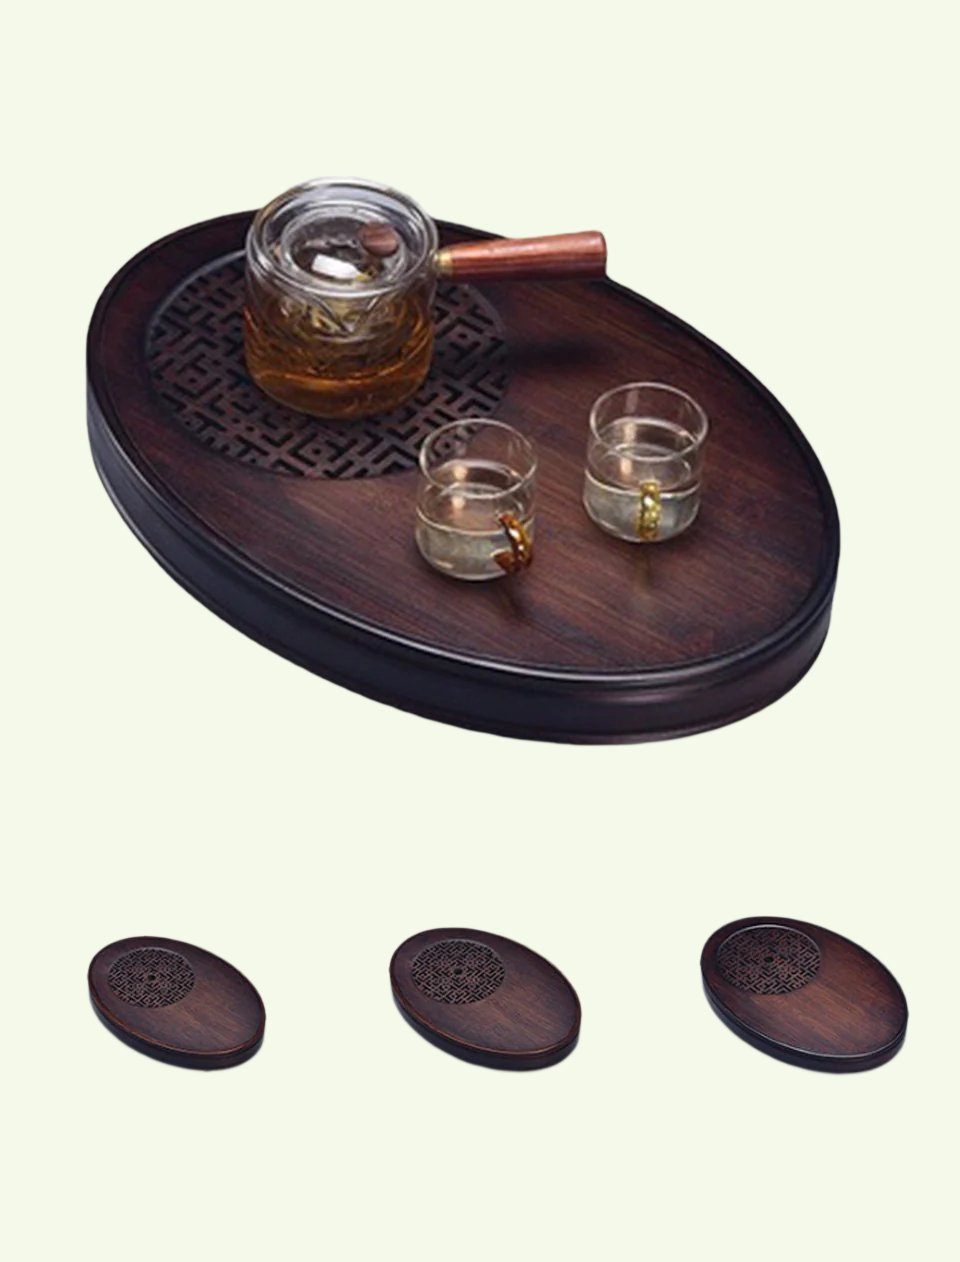 ACACUSS Tea Table Tray Drainage Tea | Drainage Bamboo tea tray square size | Tray Heavy Natural Bamboo | Gong Fu Serving Trays Accessories - ACACUSS